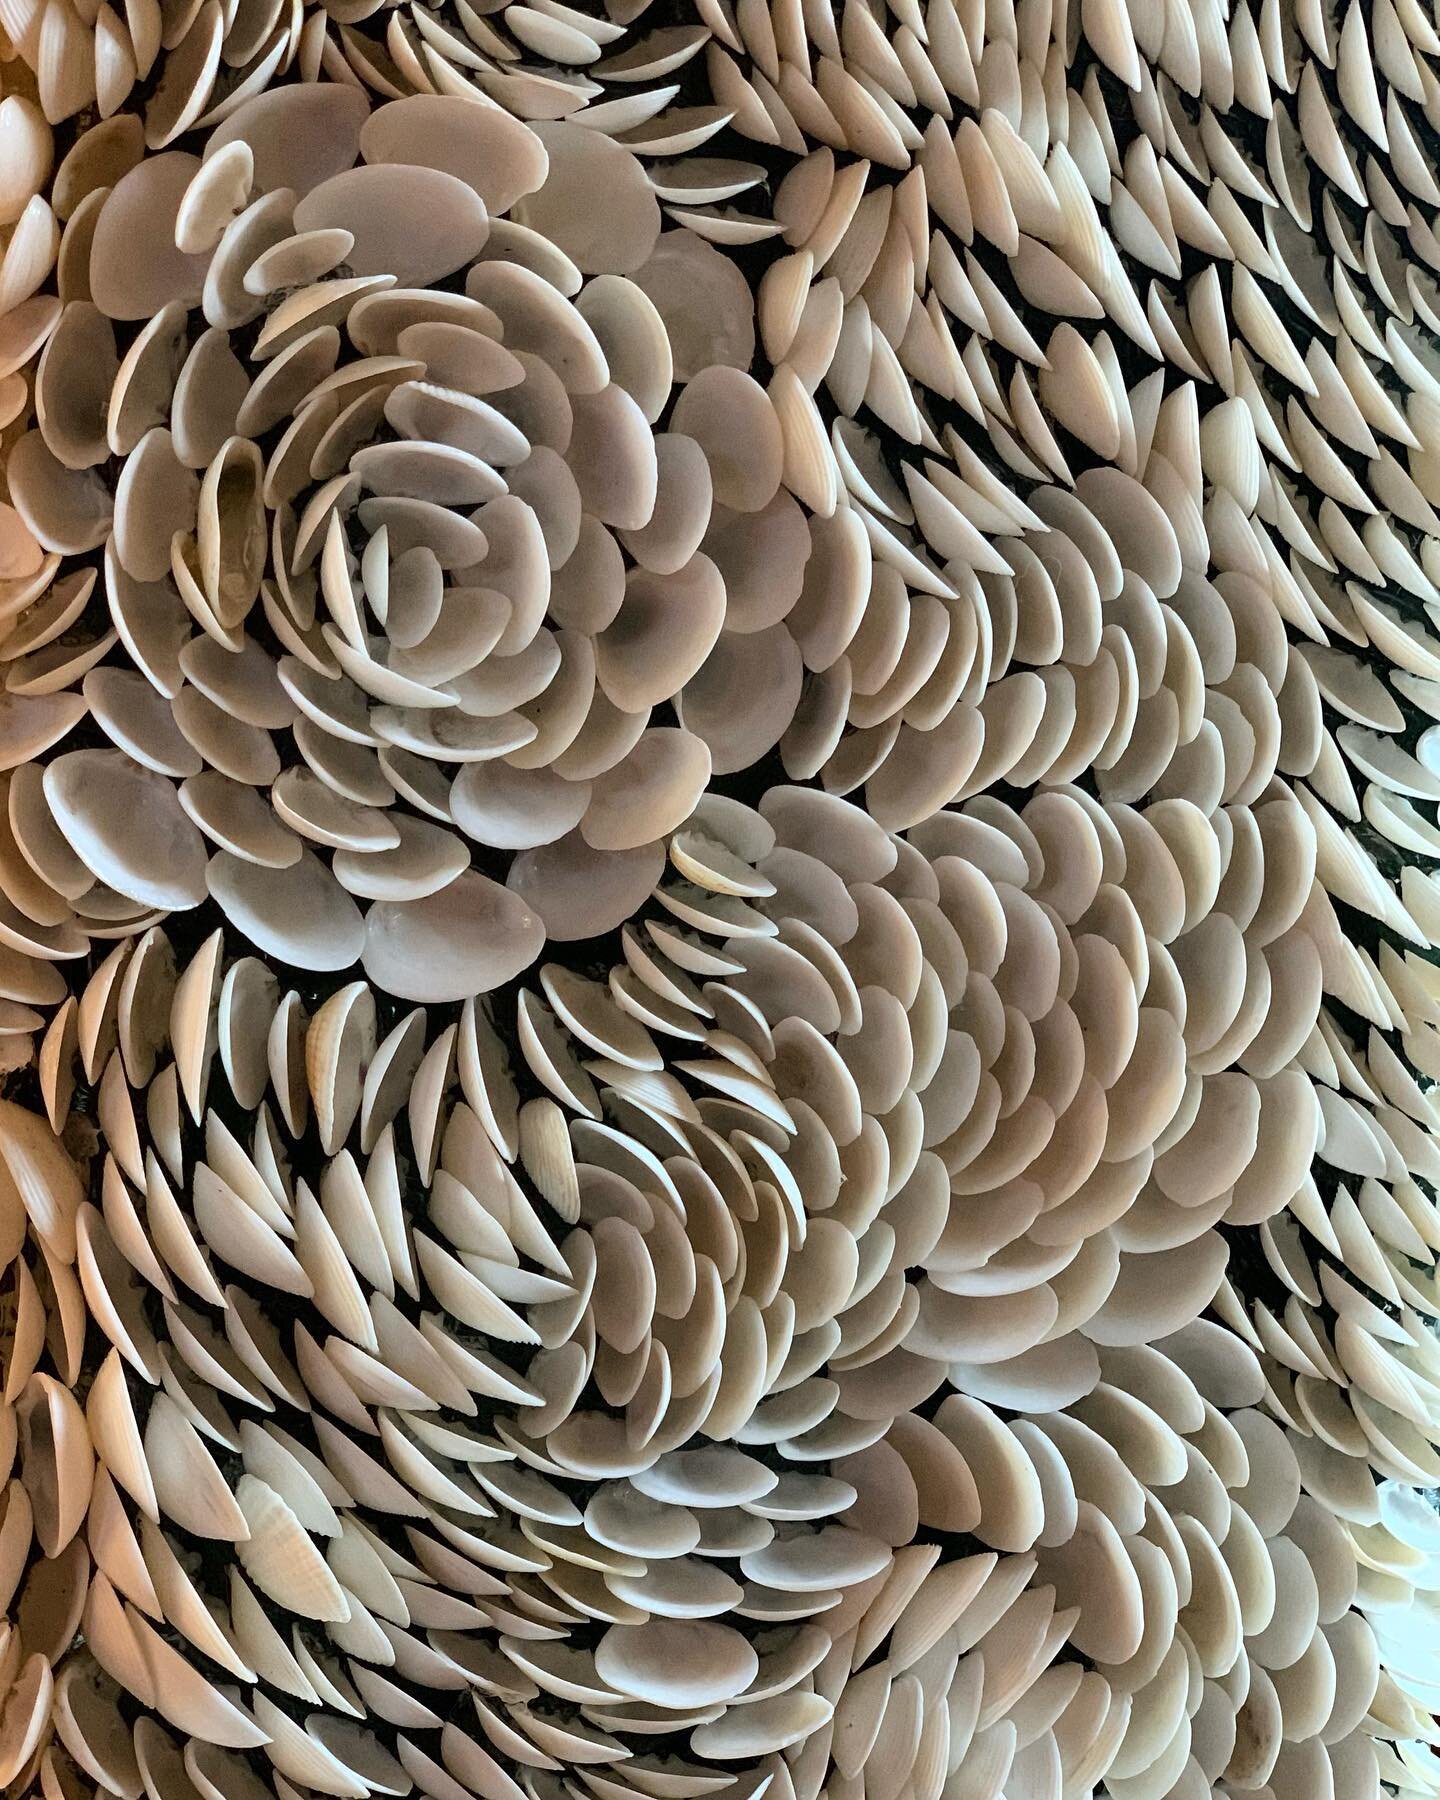 Venus clam shells - background wall  colour can also play a big part. 

These little white beauties are incredibly versatile and resilient. In profusion on a wall they have real presence. 

#shellinteriors
#shellininteriors
#decorativewalls
#shellwal